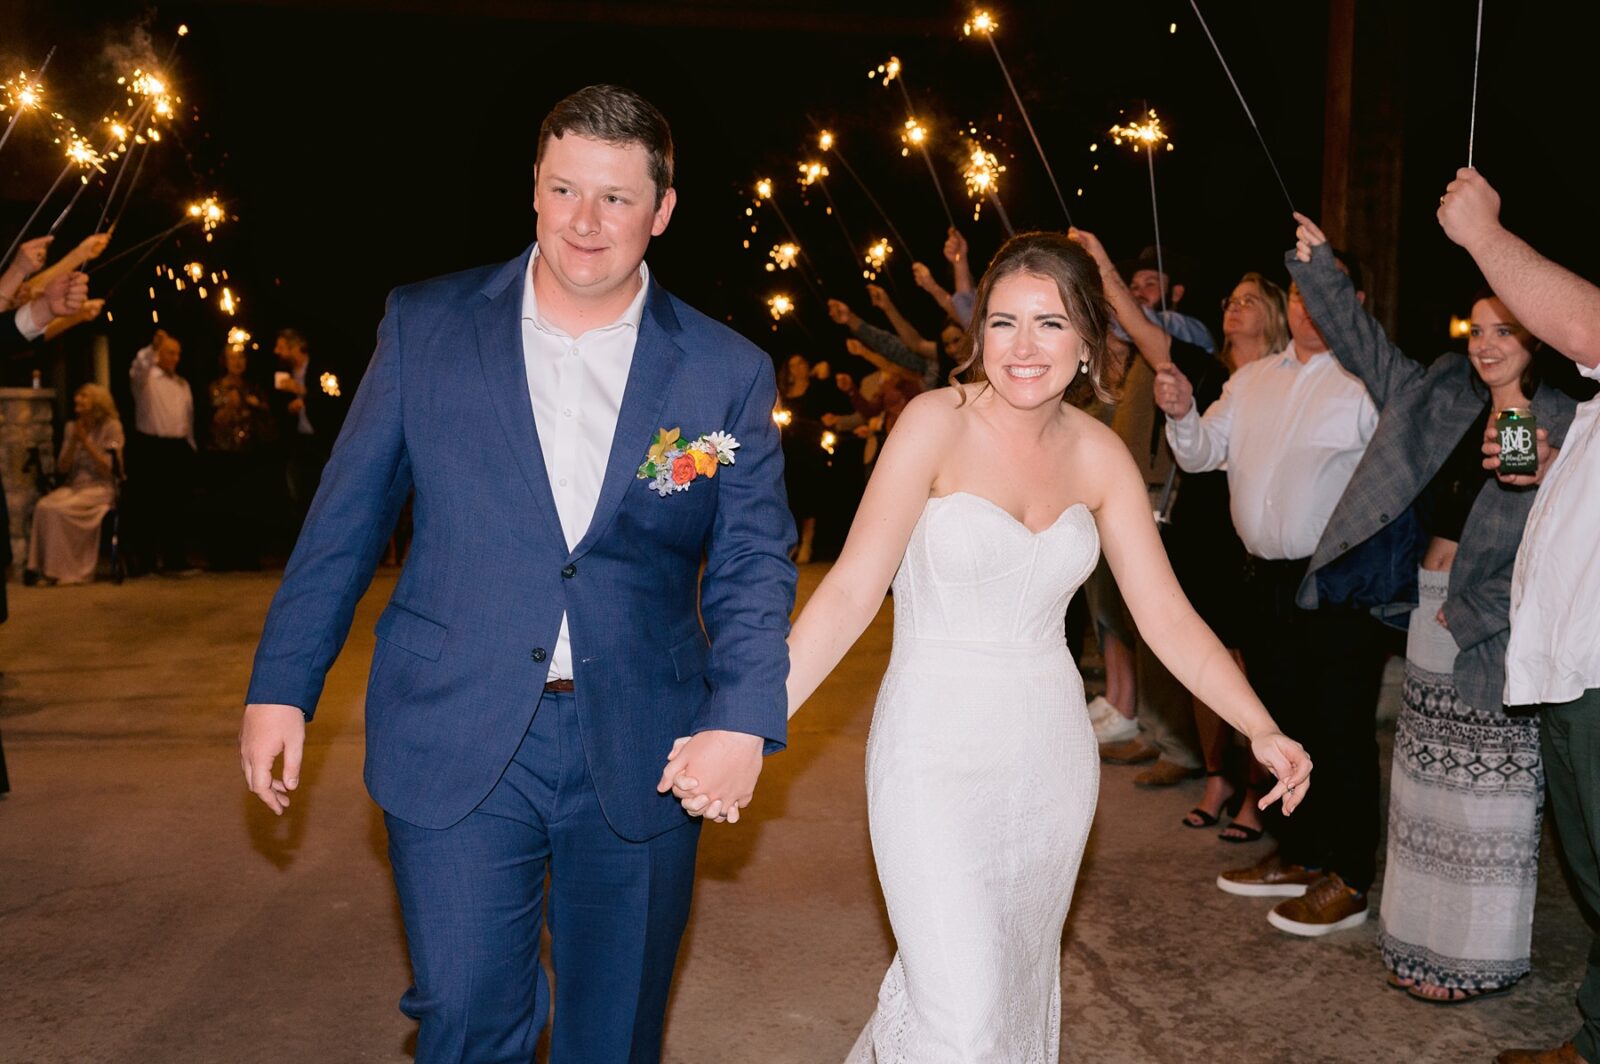 sparkler exit, sparkler exit at the videre, grand exit ideas, reception dancing, guests dancing at wedding, videre estate reception space, wedding at the videre estate venue, wimberley, 